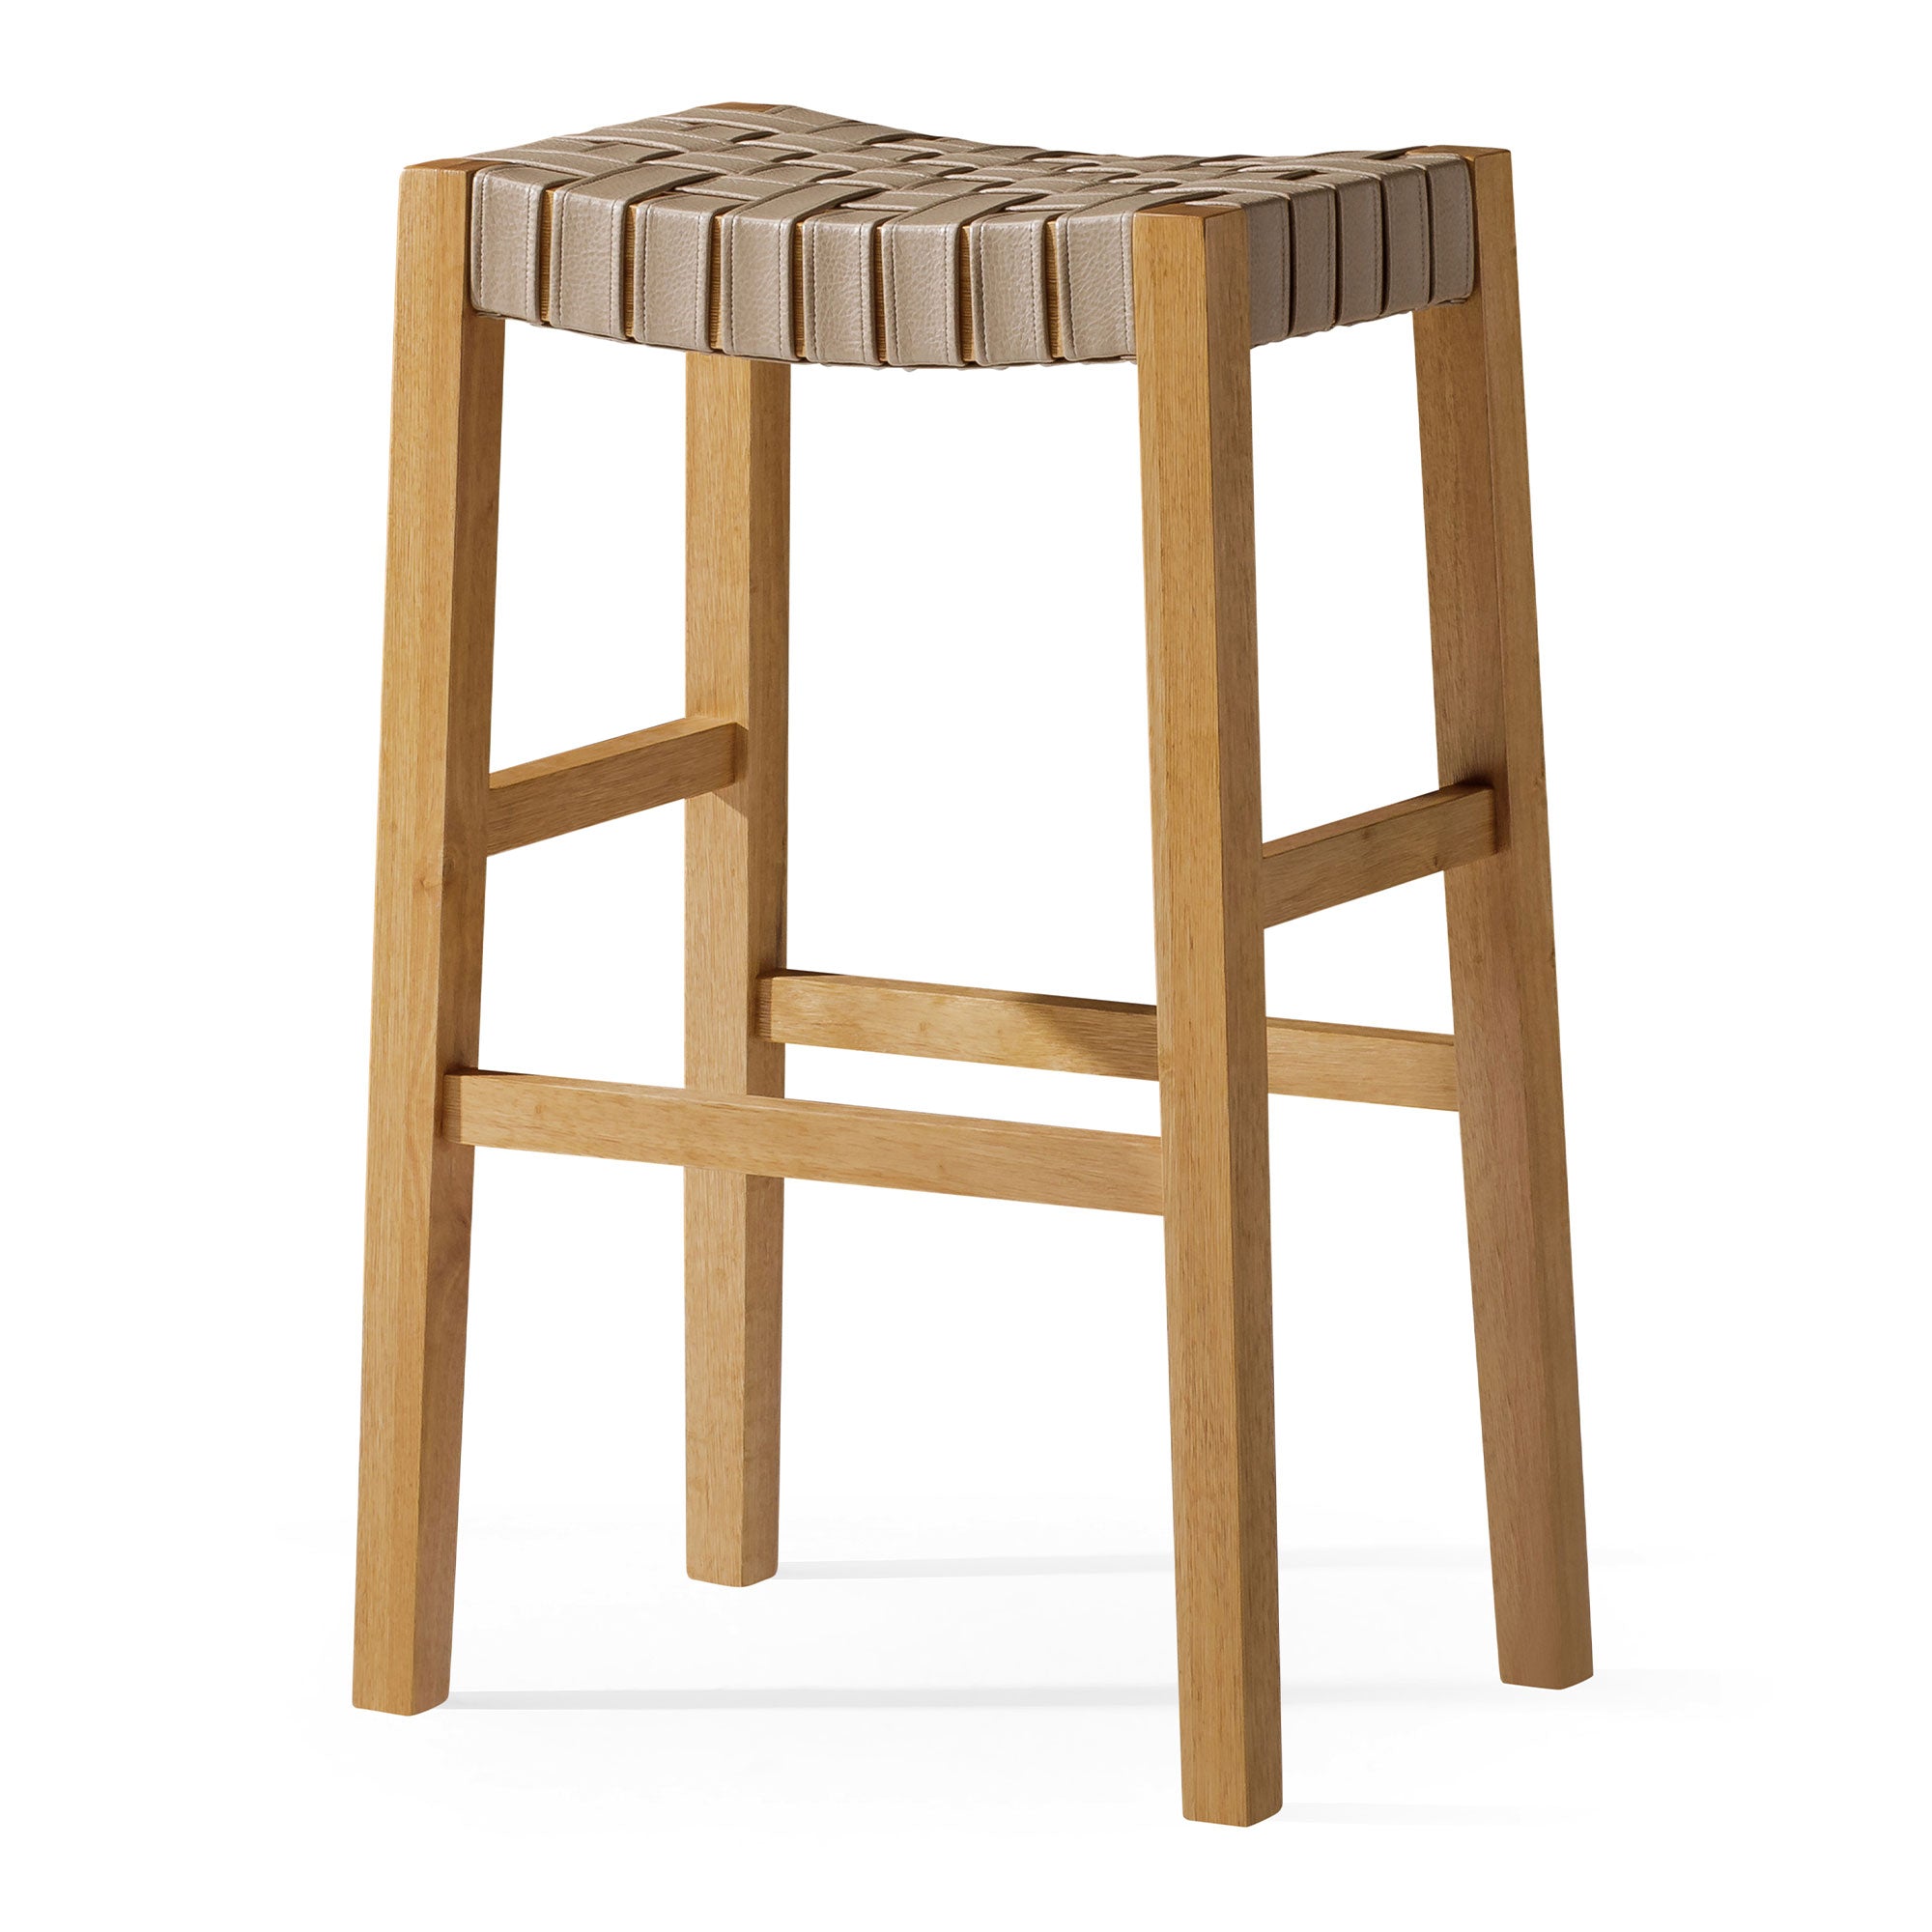 Emerson Bar Stool in Weathered Natural Wood Finish with Avanti Bone Vegan Leather in Stools by Maven Lane